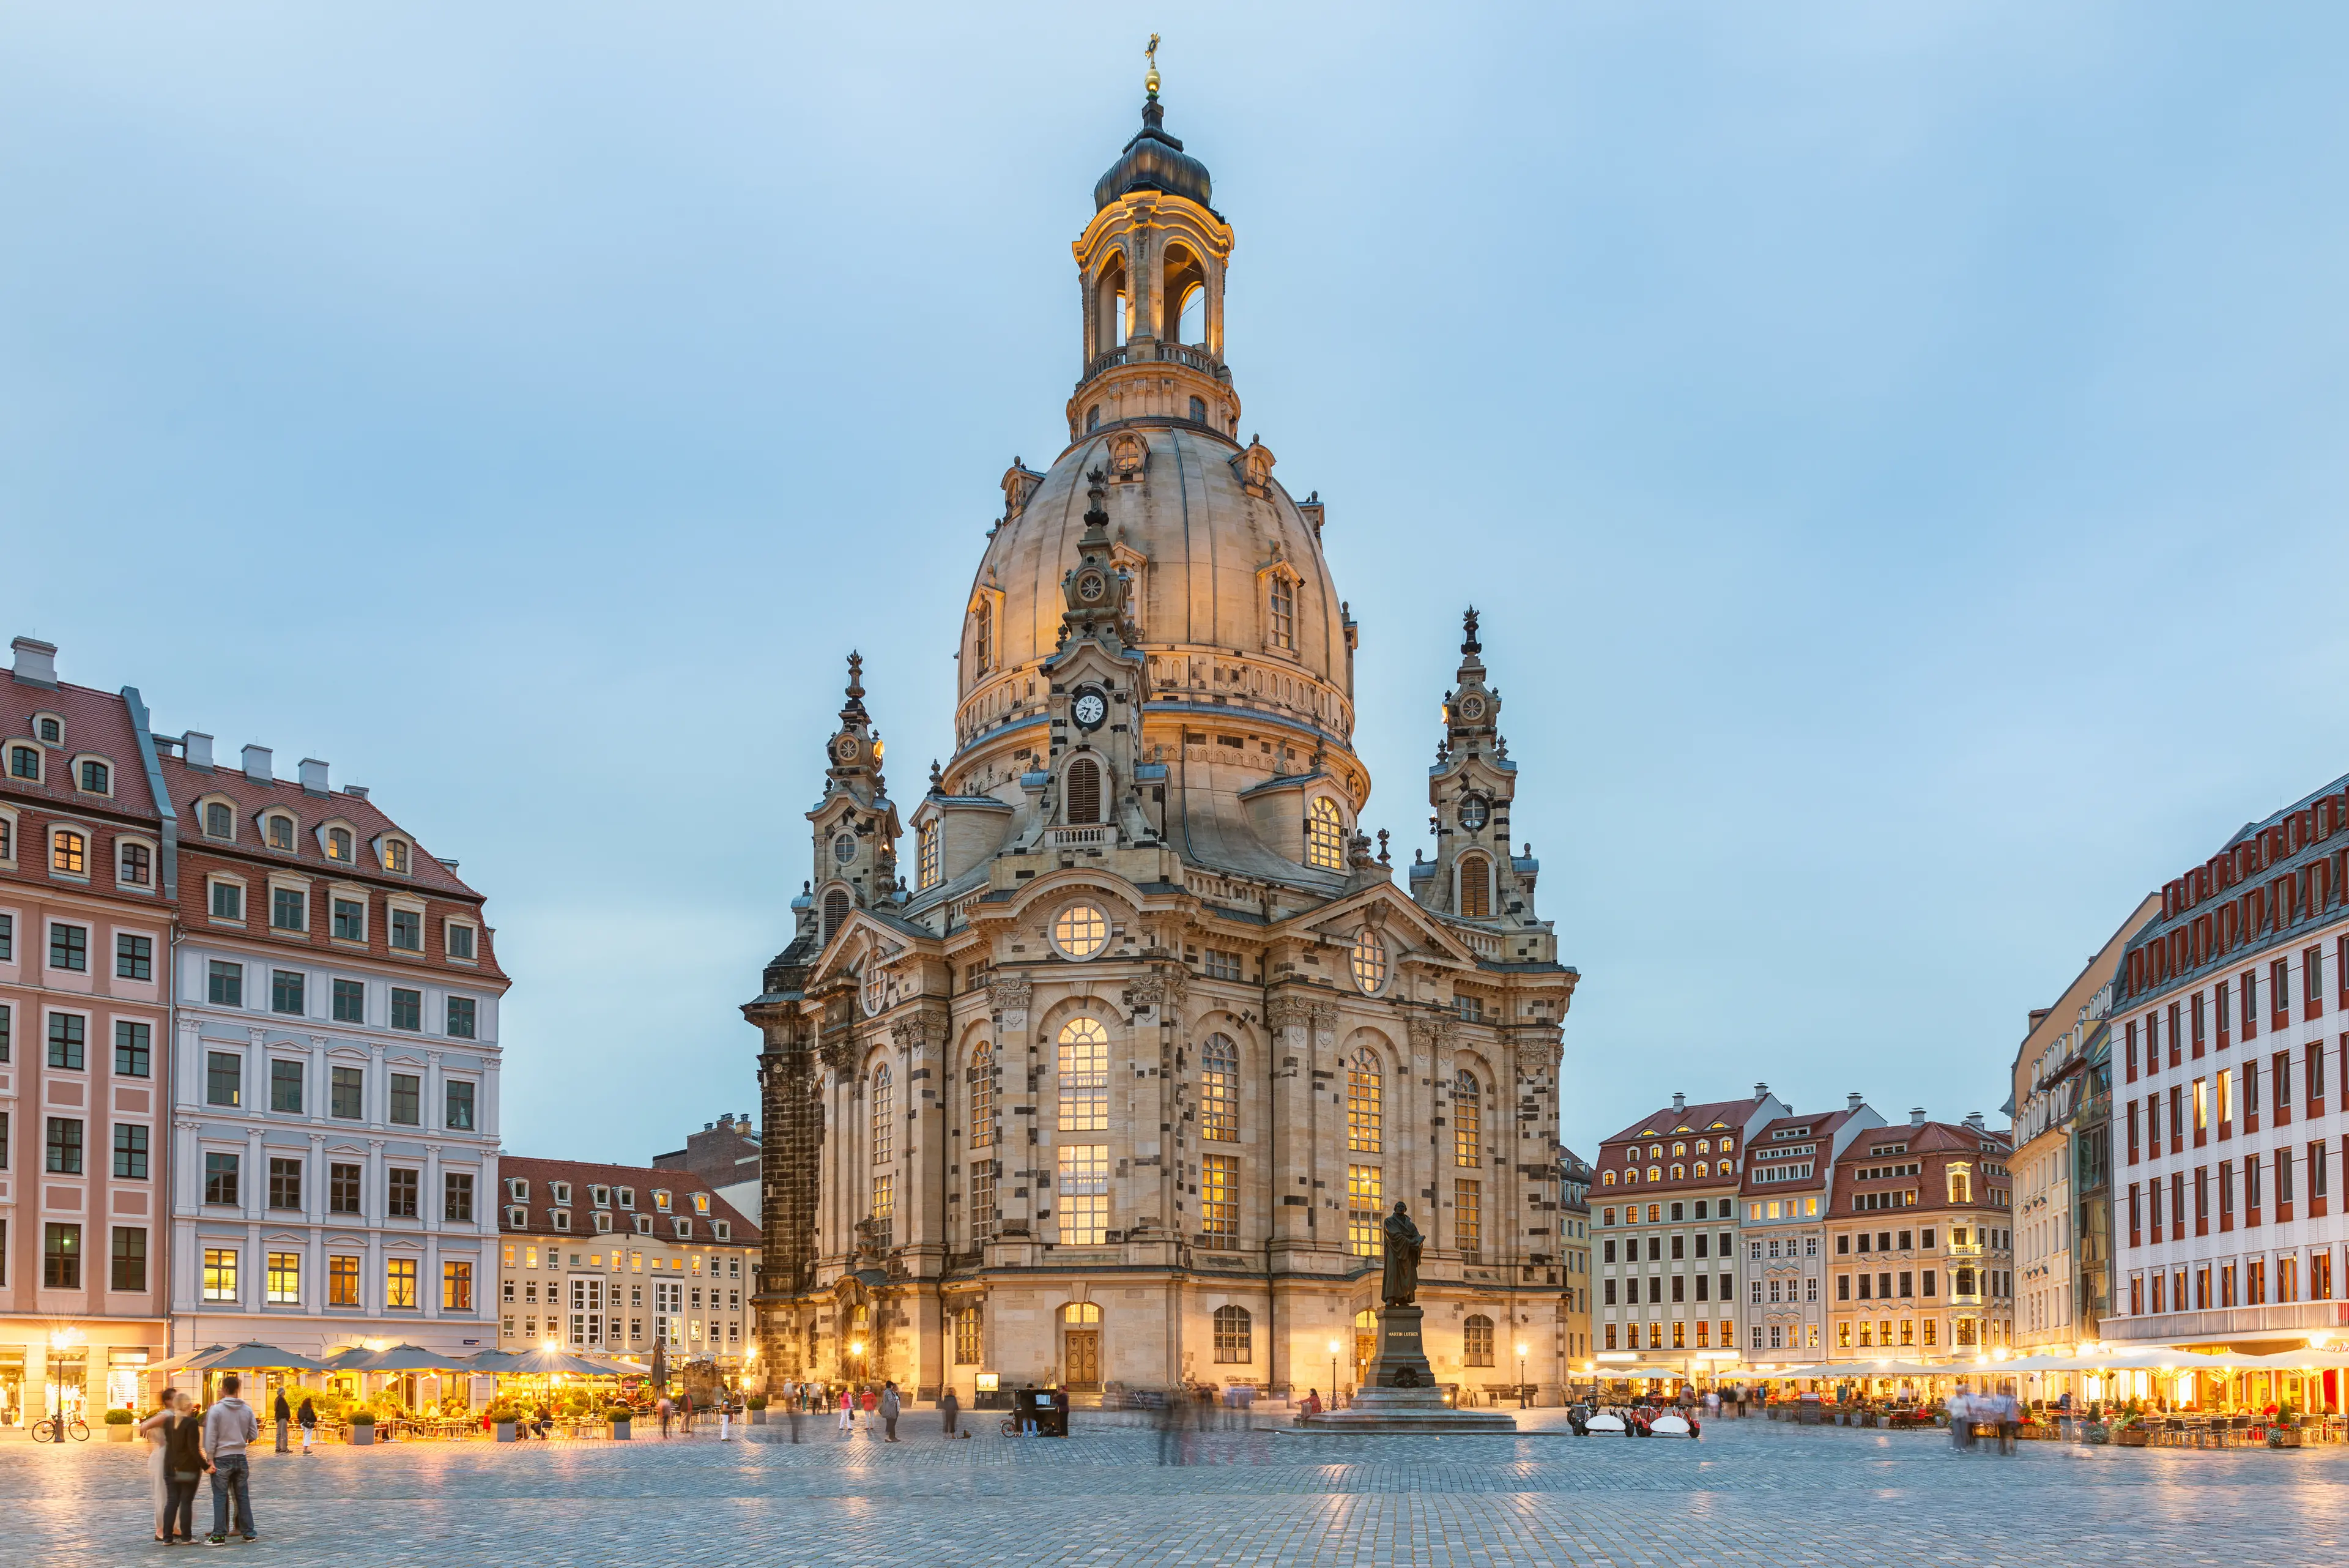 4-Day Adventure Guide to Dresden, Germany